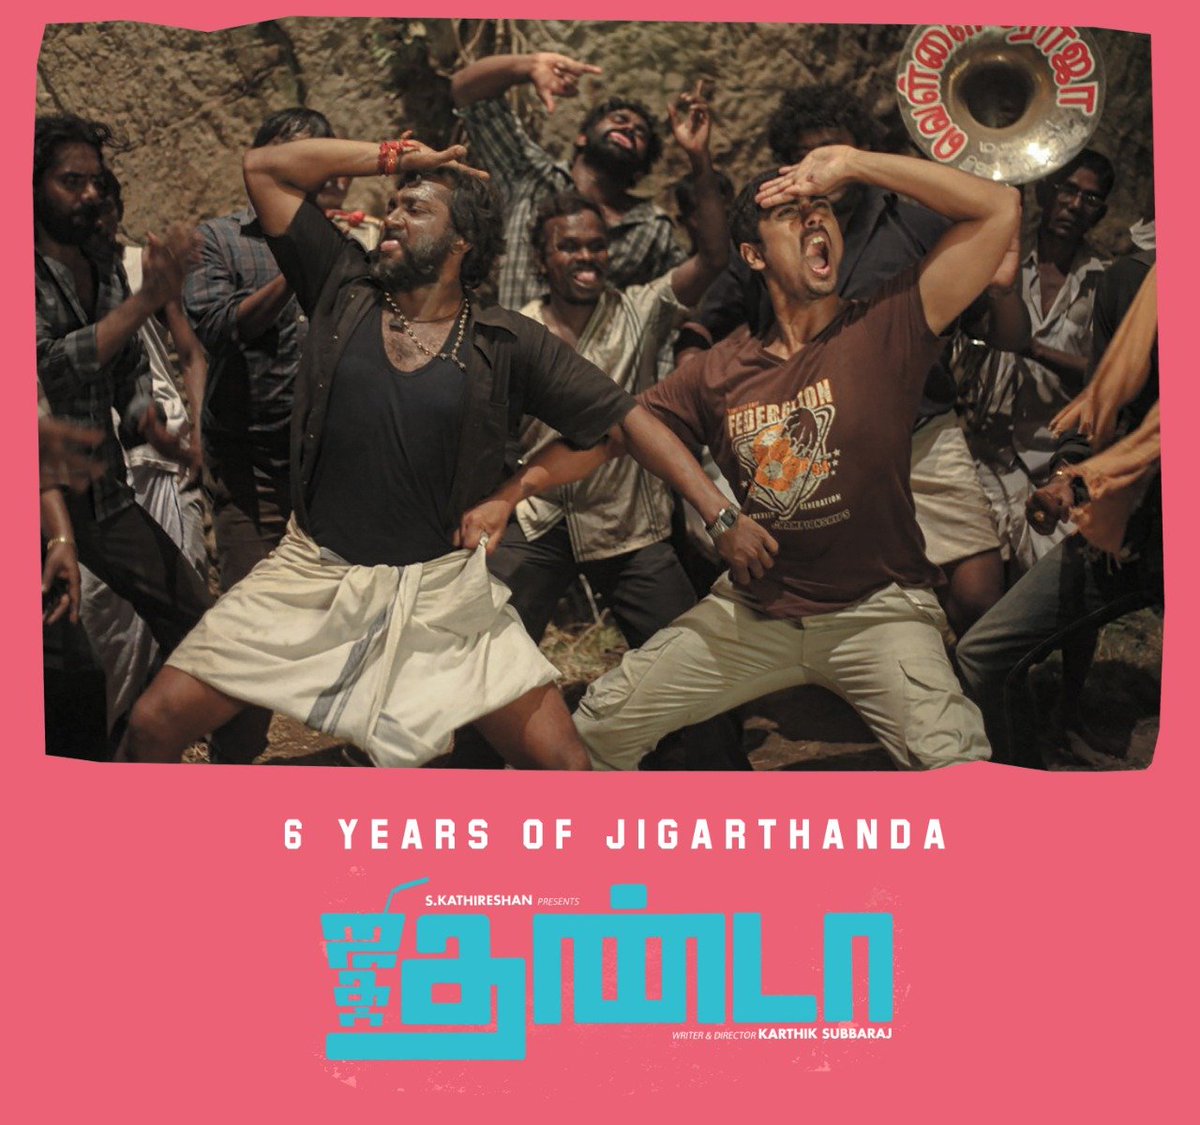 #6yearsofJigarthanda This day 6 years back gave a lot of Life changing moments to me and most of us in the team.... Thanks for all the love shown to our film #Jigarthanda 🙏